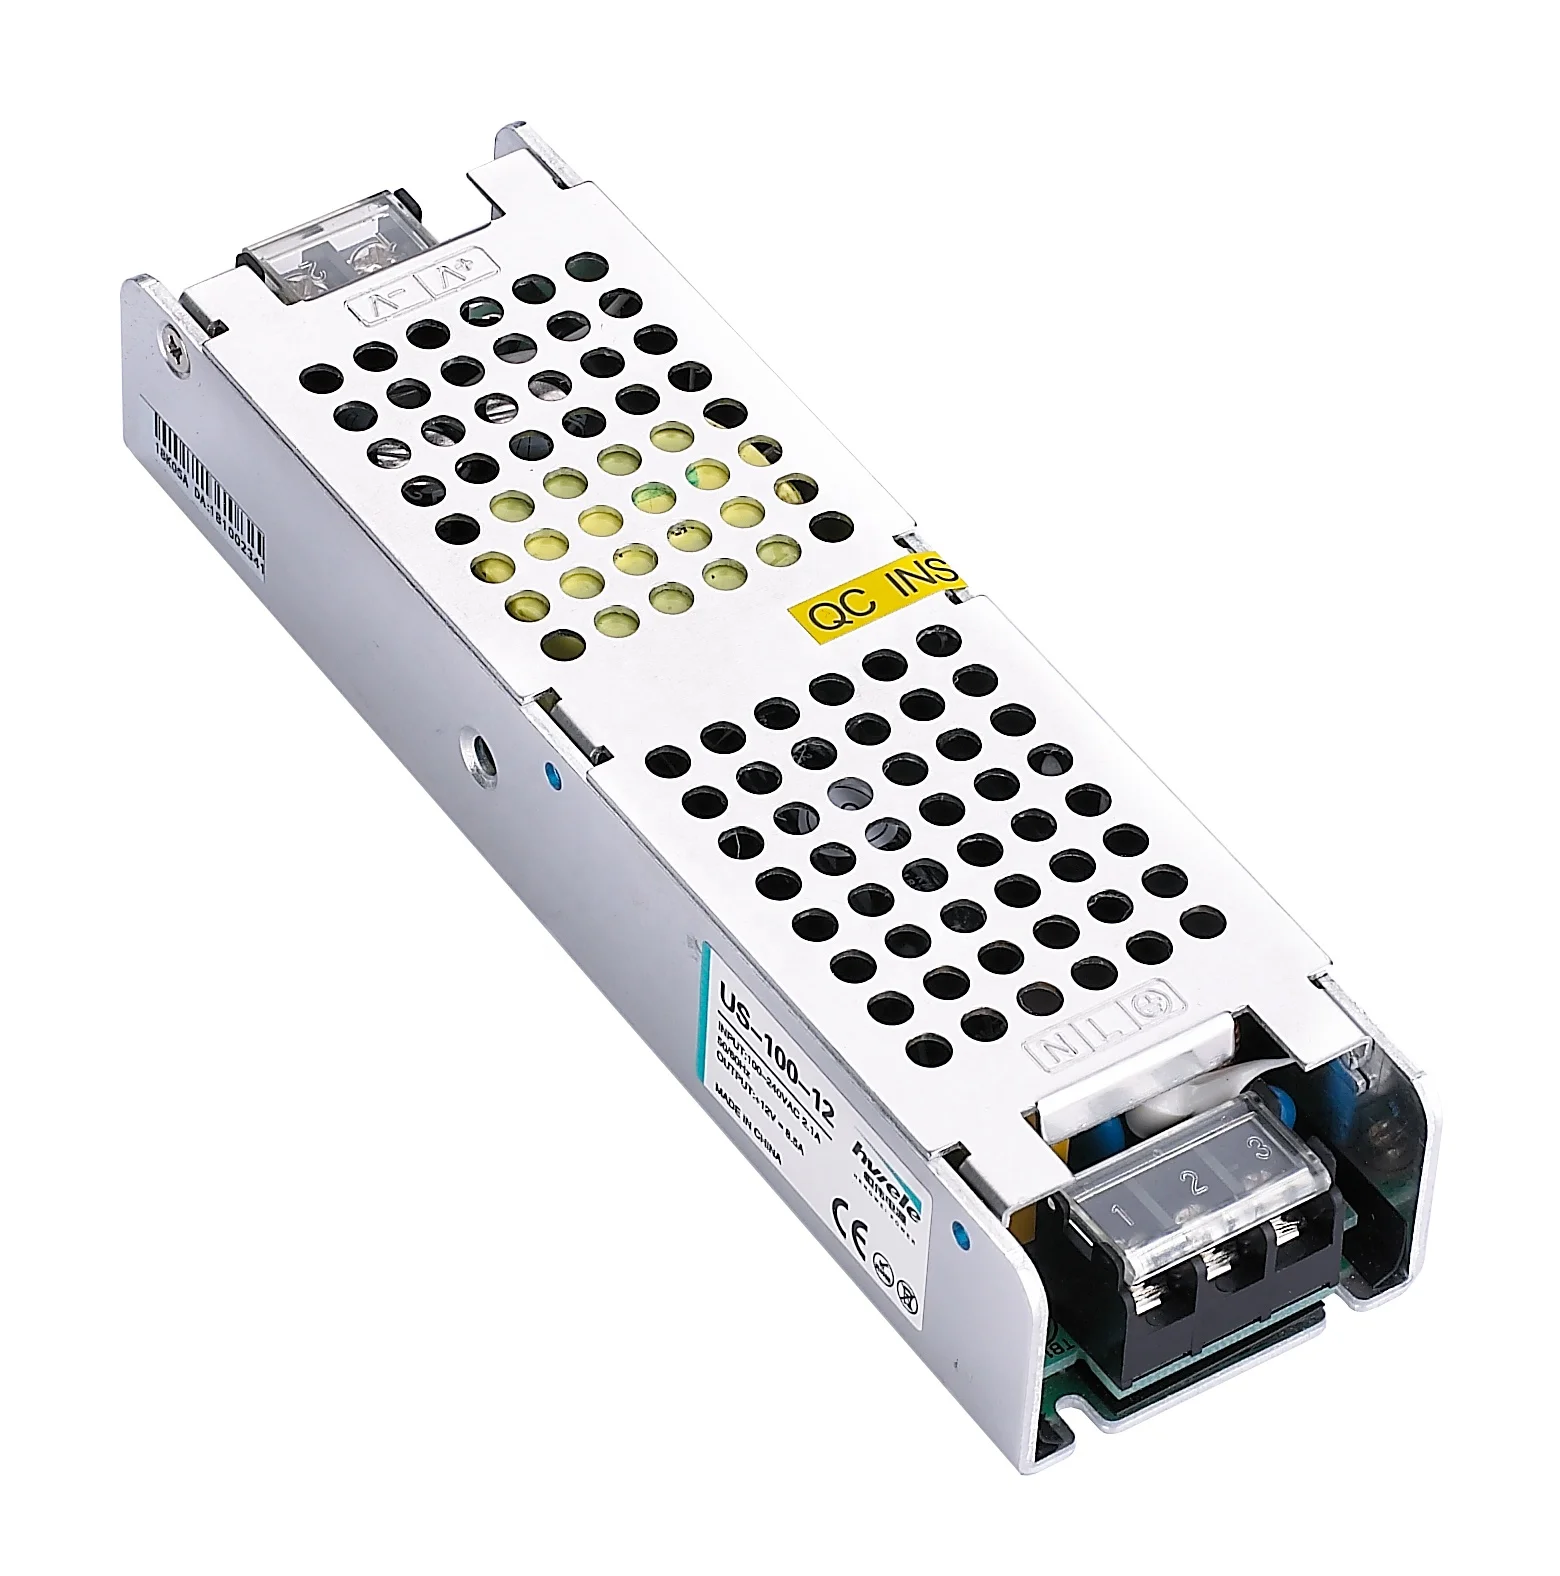 Slim type CV enclosed type US-100-12 100W 12V 8.3A SWITCHING POWER SUPPLY for LED display